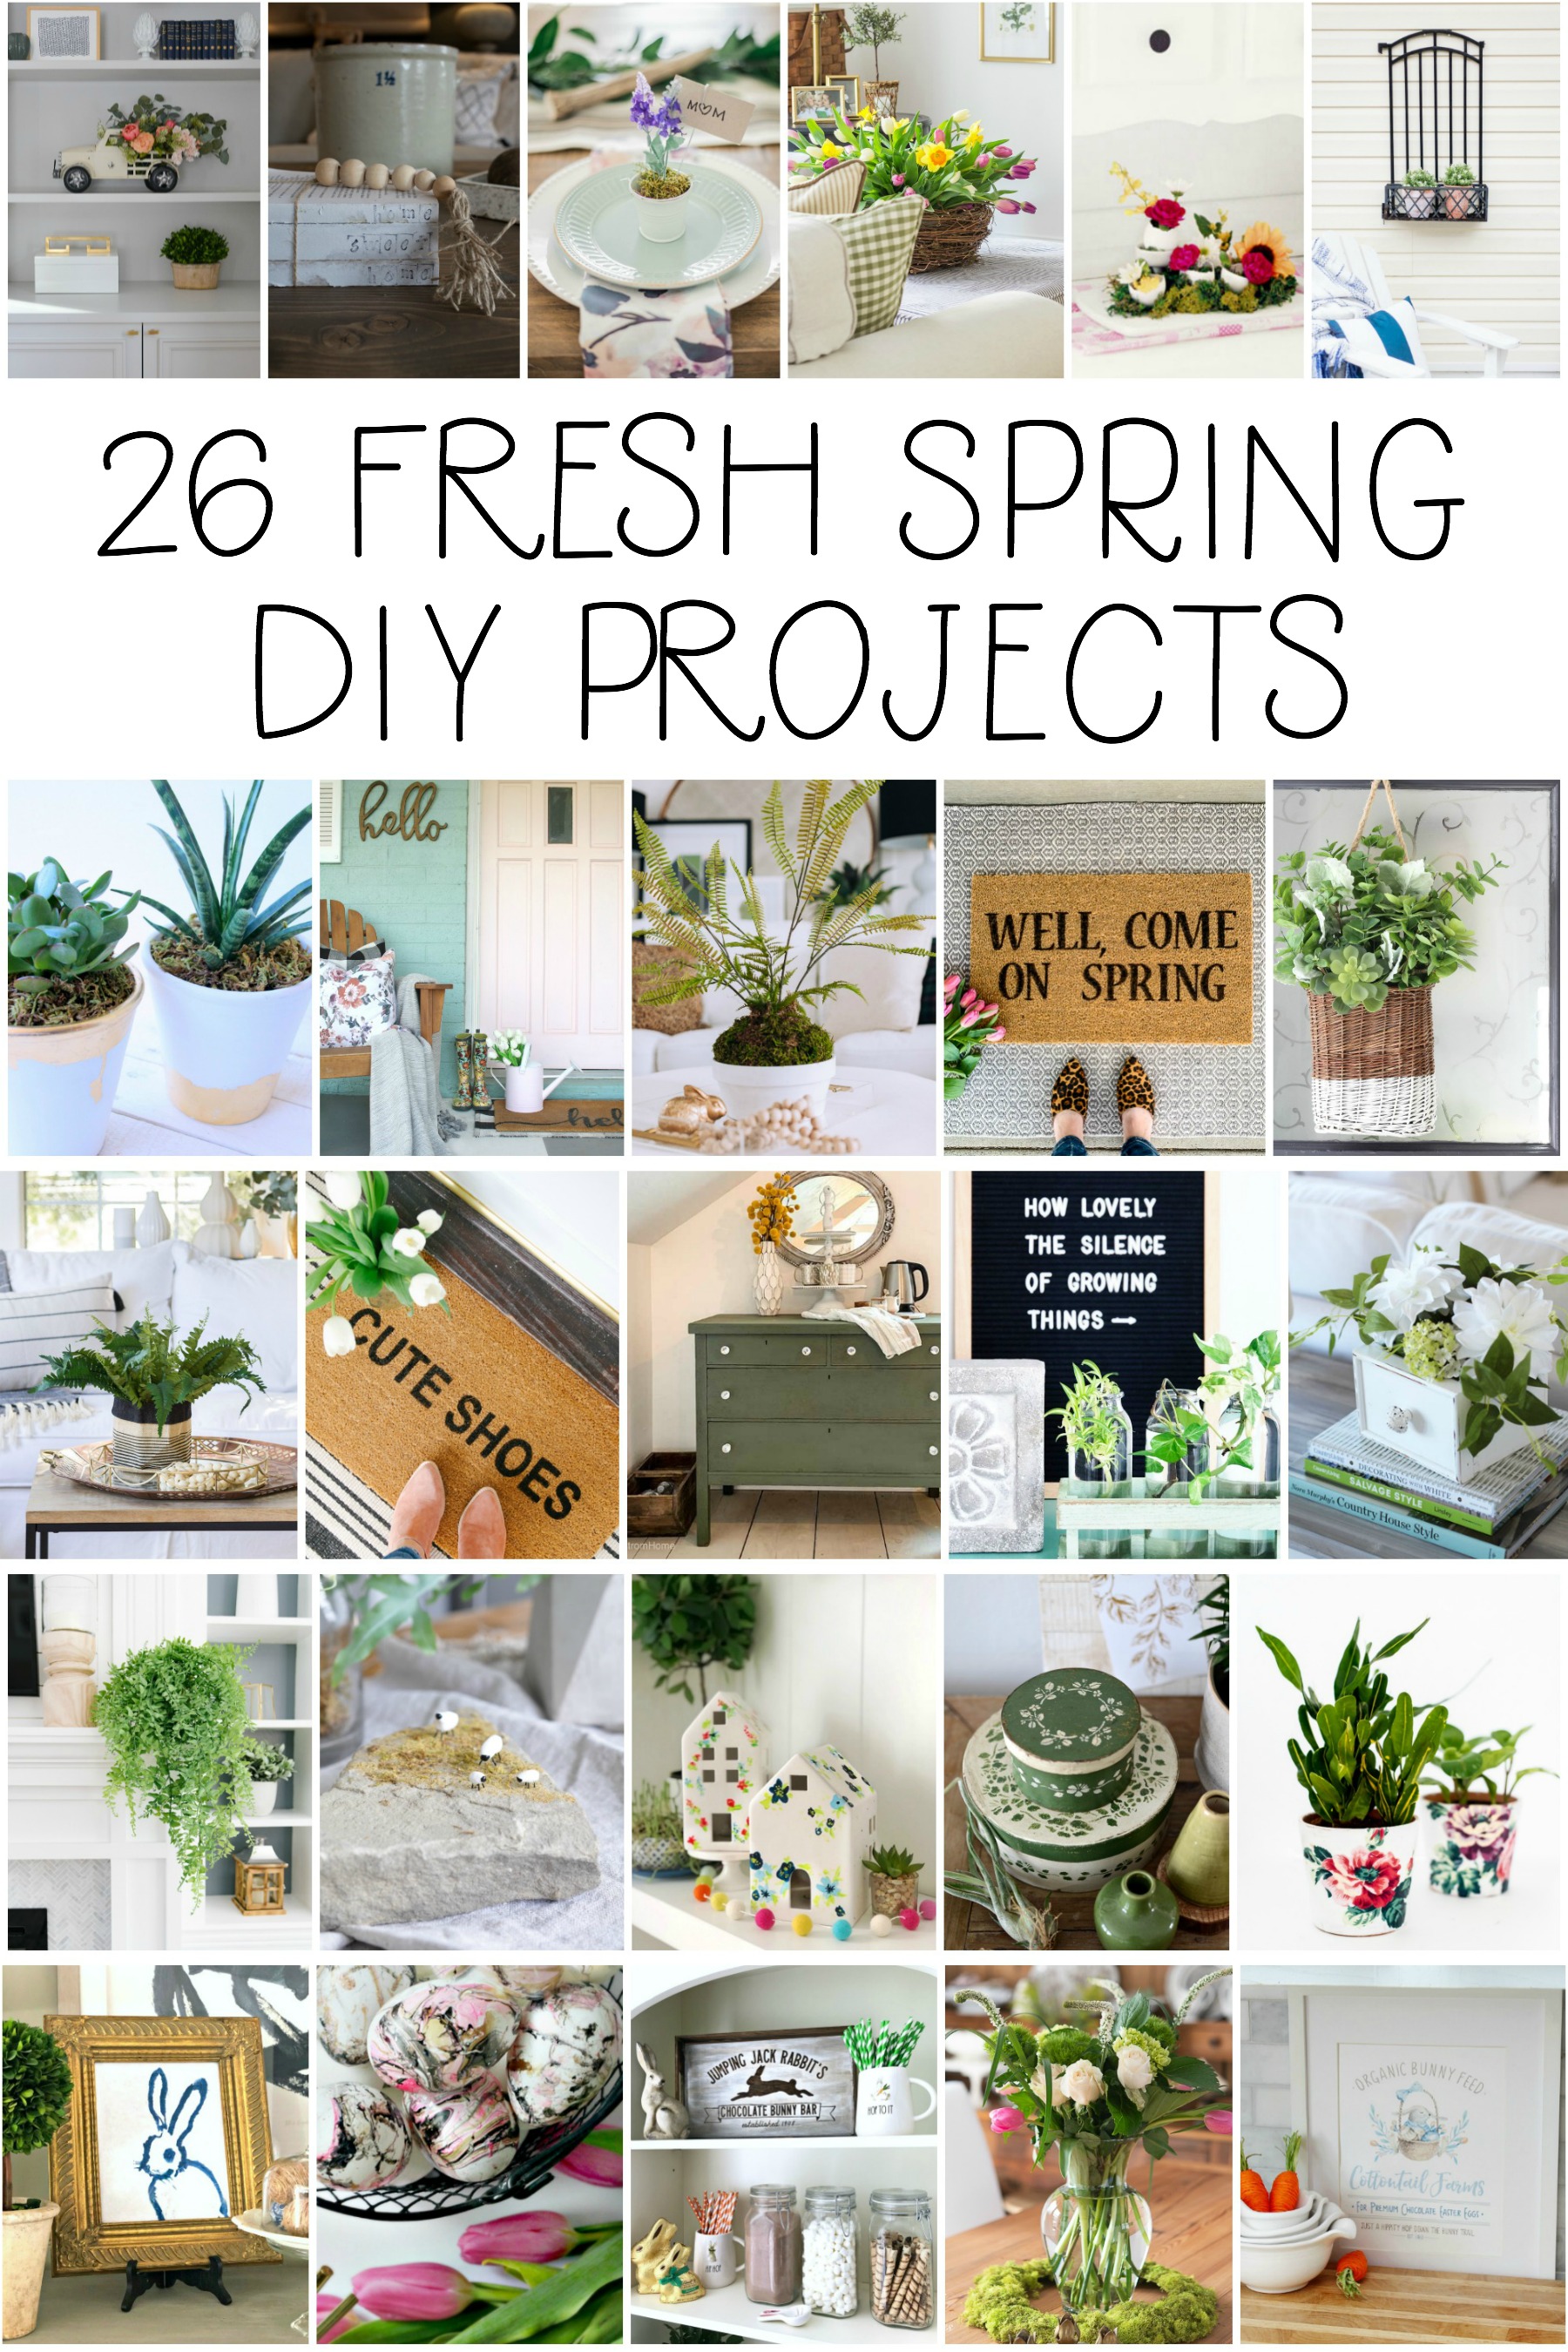 26 Fresh Spring DIY Projects poster.